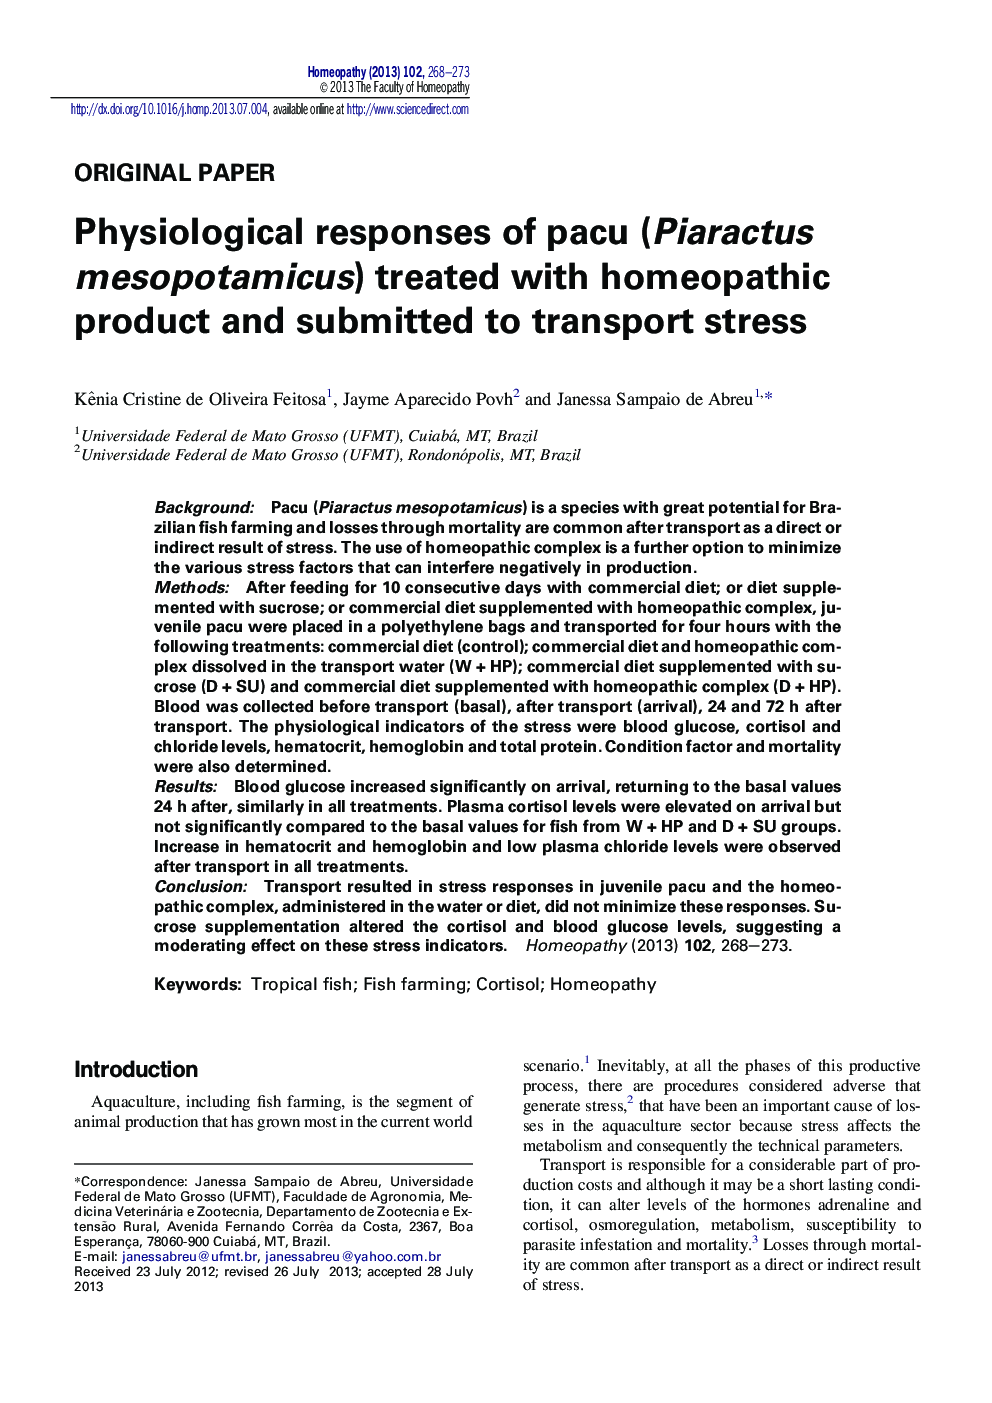 Physiological responses of pacu (Piaractus mesopotamicus) treated with homeopathic product and submitted to transport stress